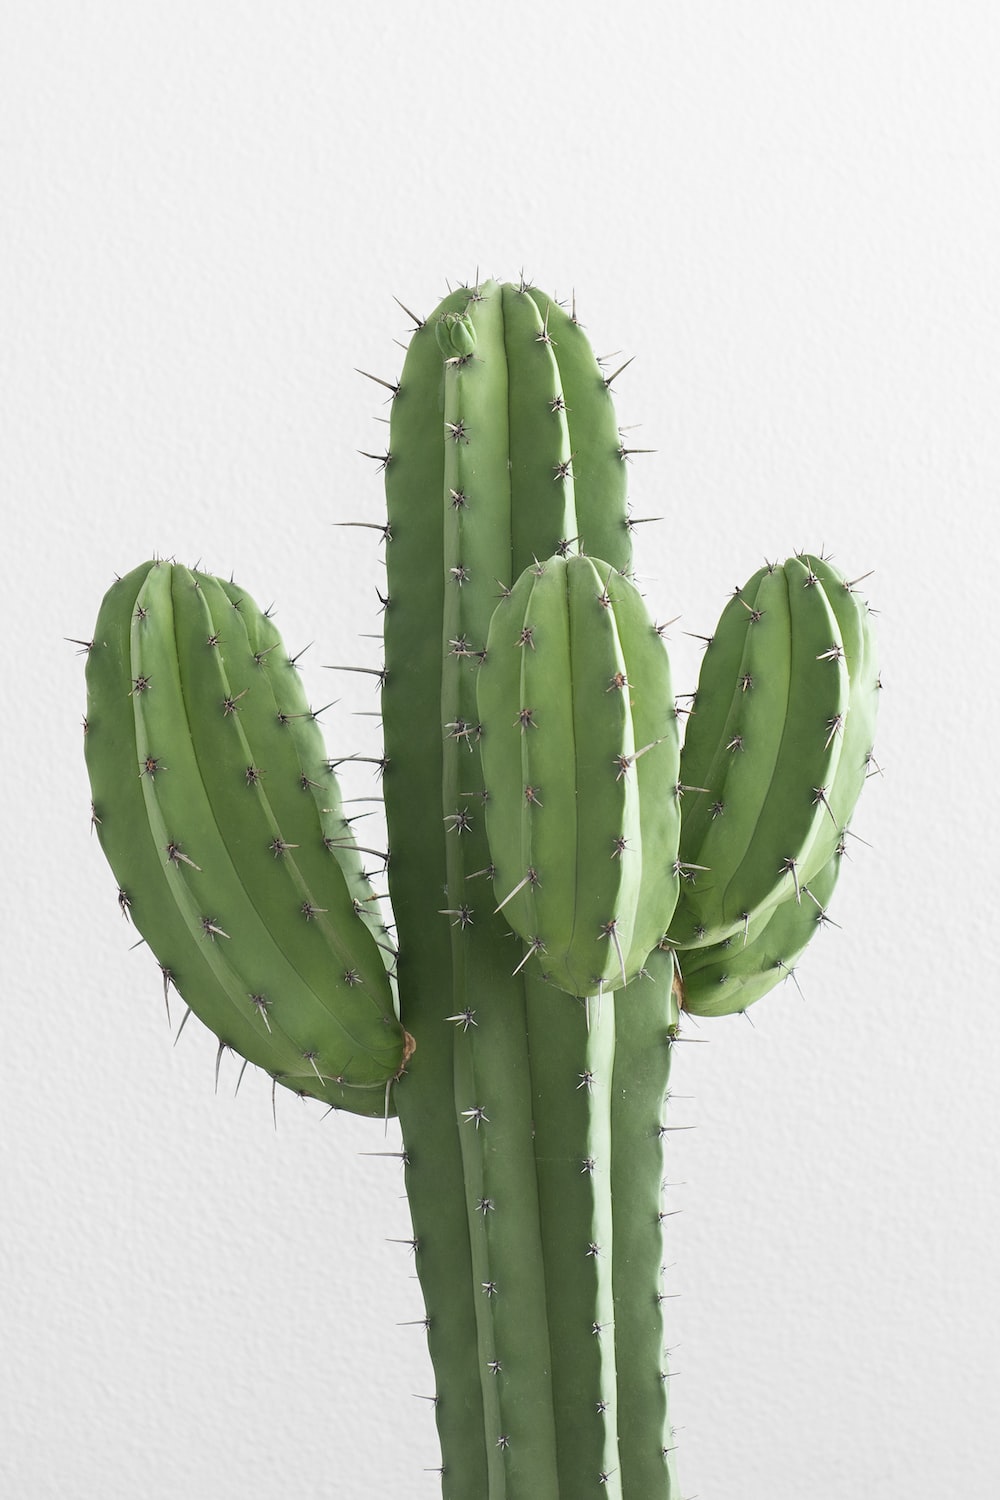 A cactus with a white background - Cactus